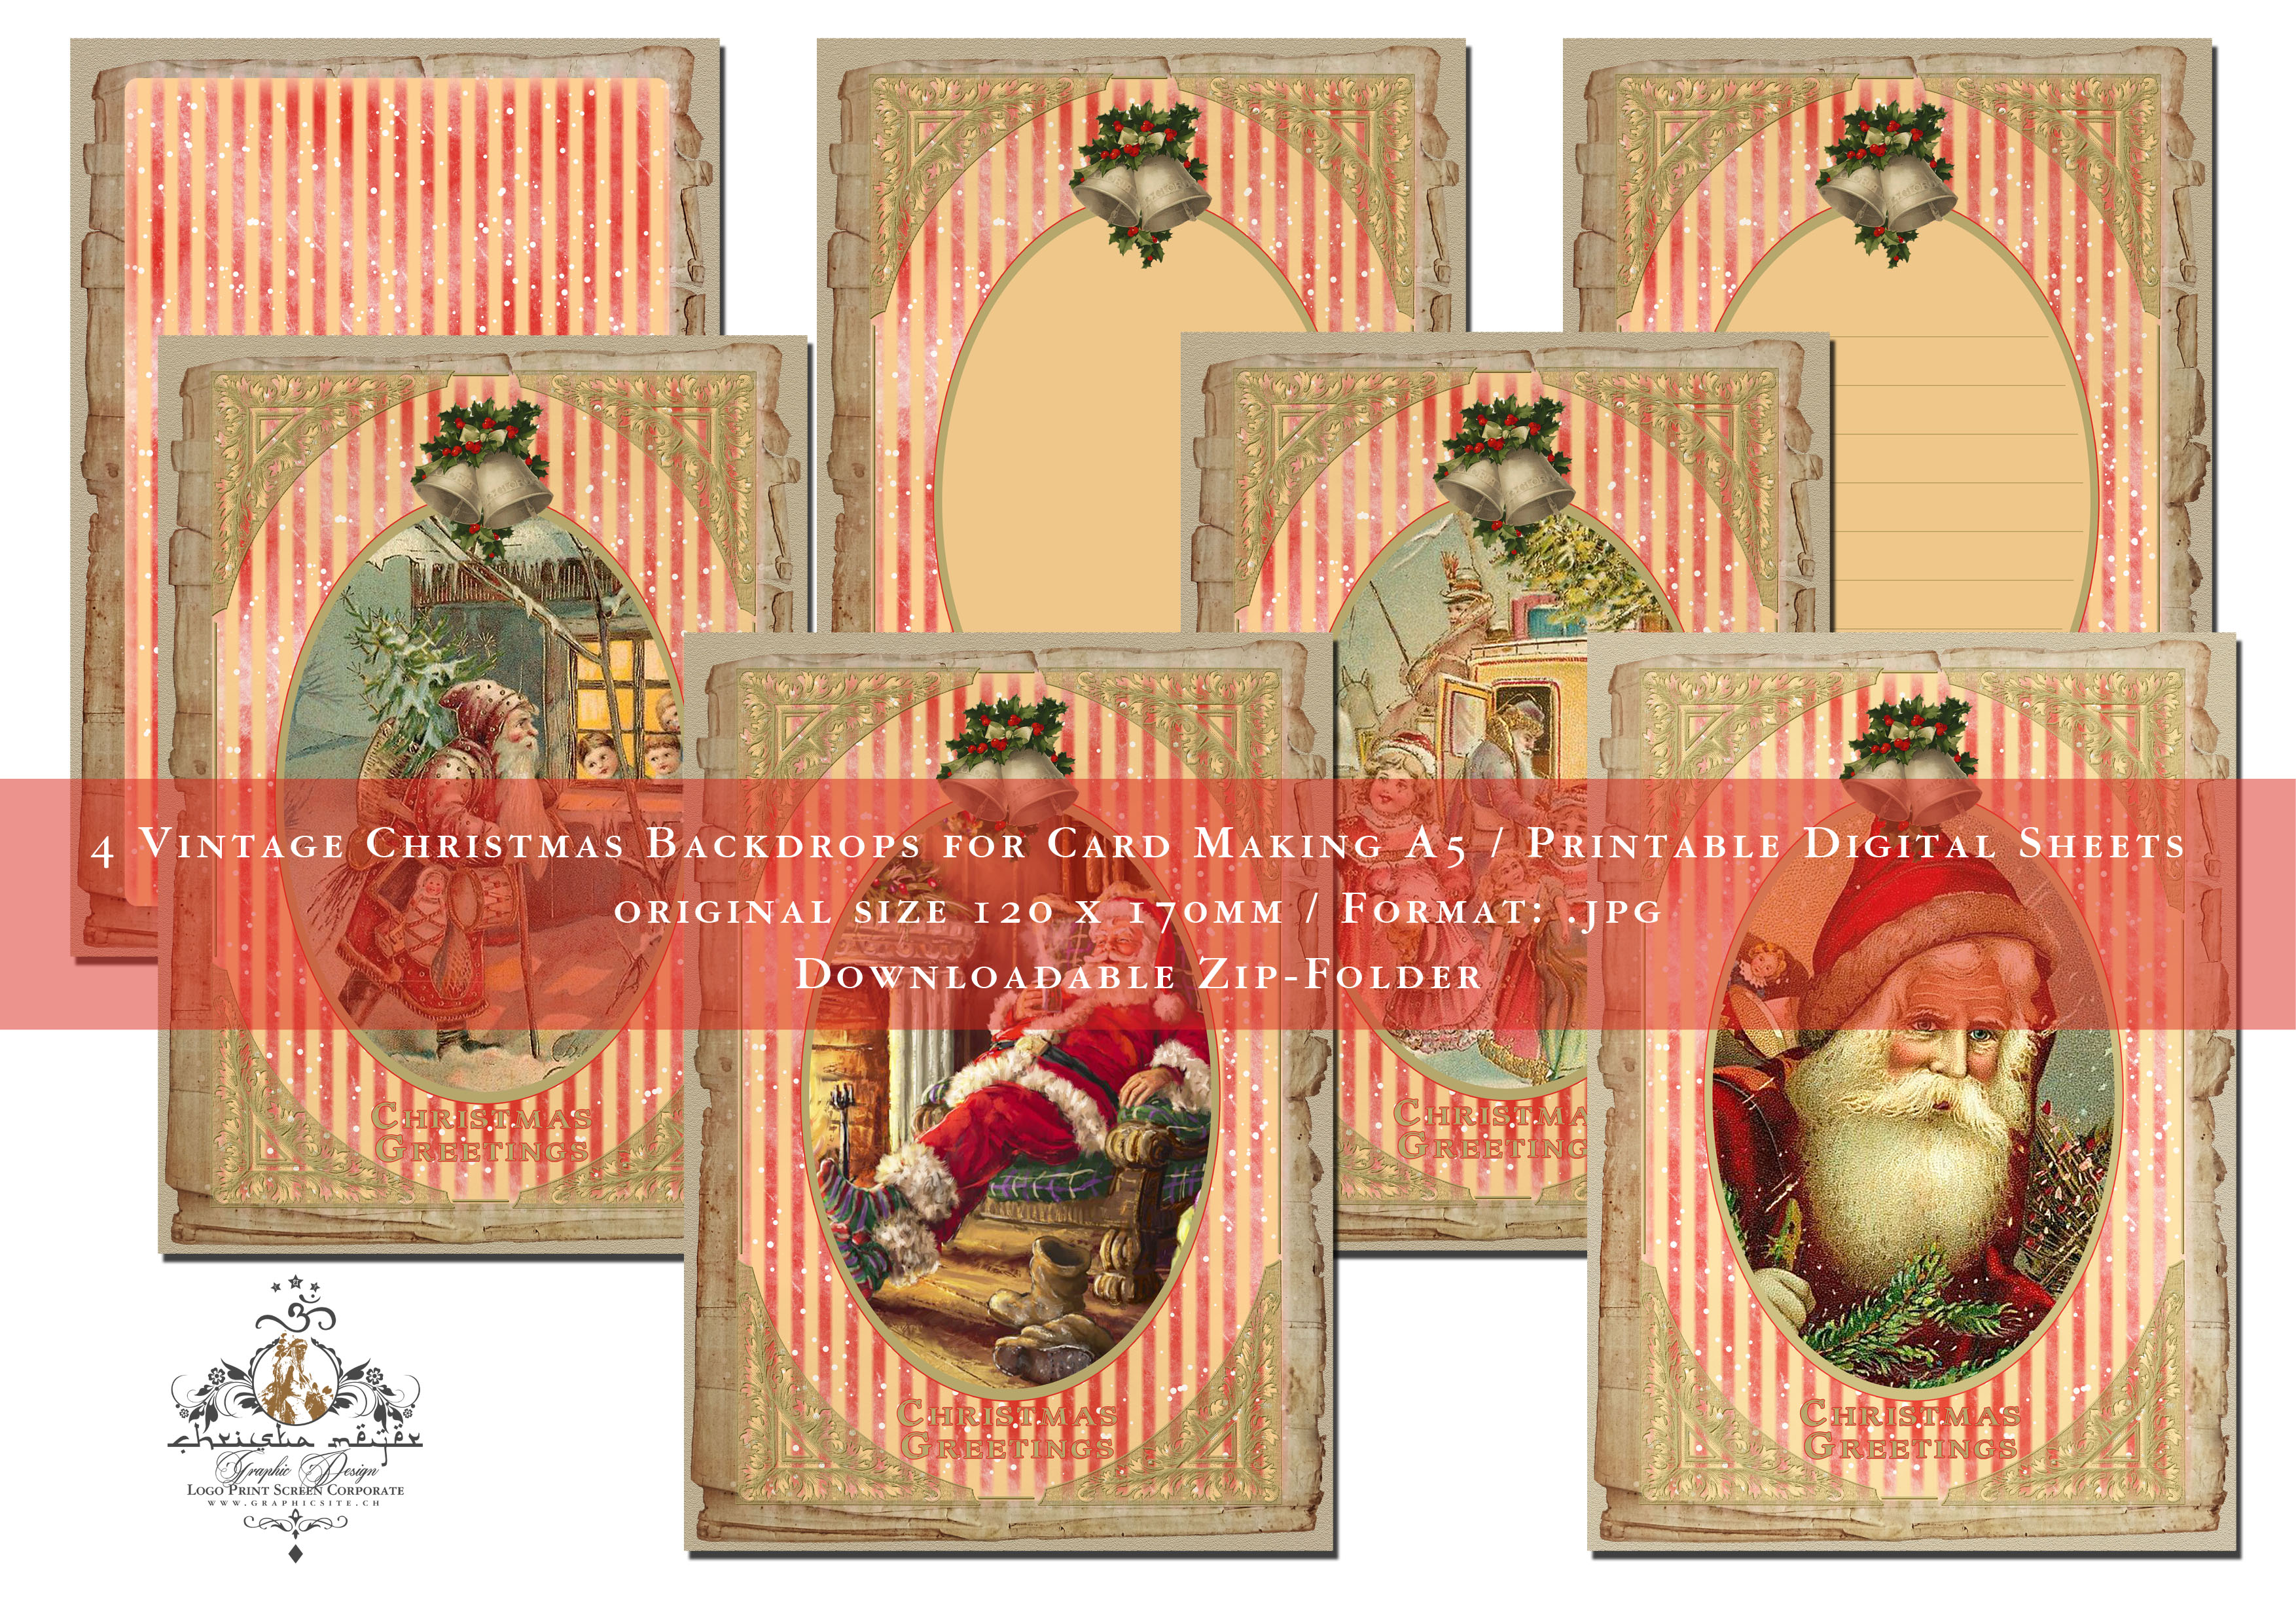 Digital Backgrounds, Card Making, Stationary, Christmas, Greeting Cards, Postcards, Santa Claus,